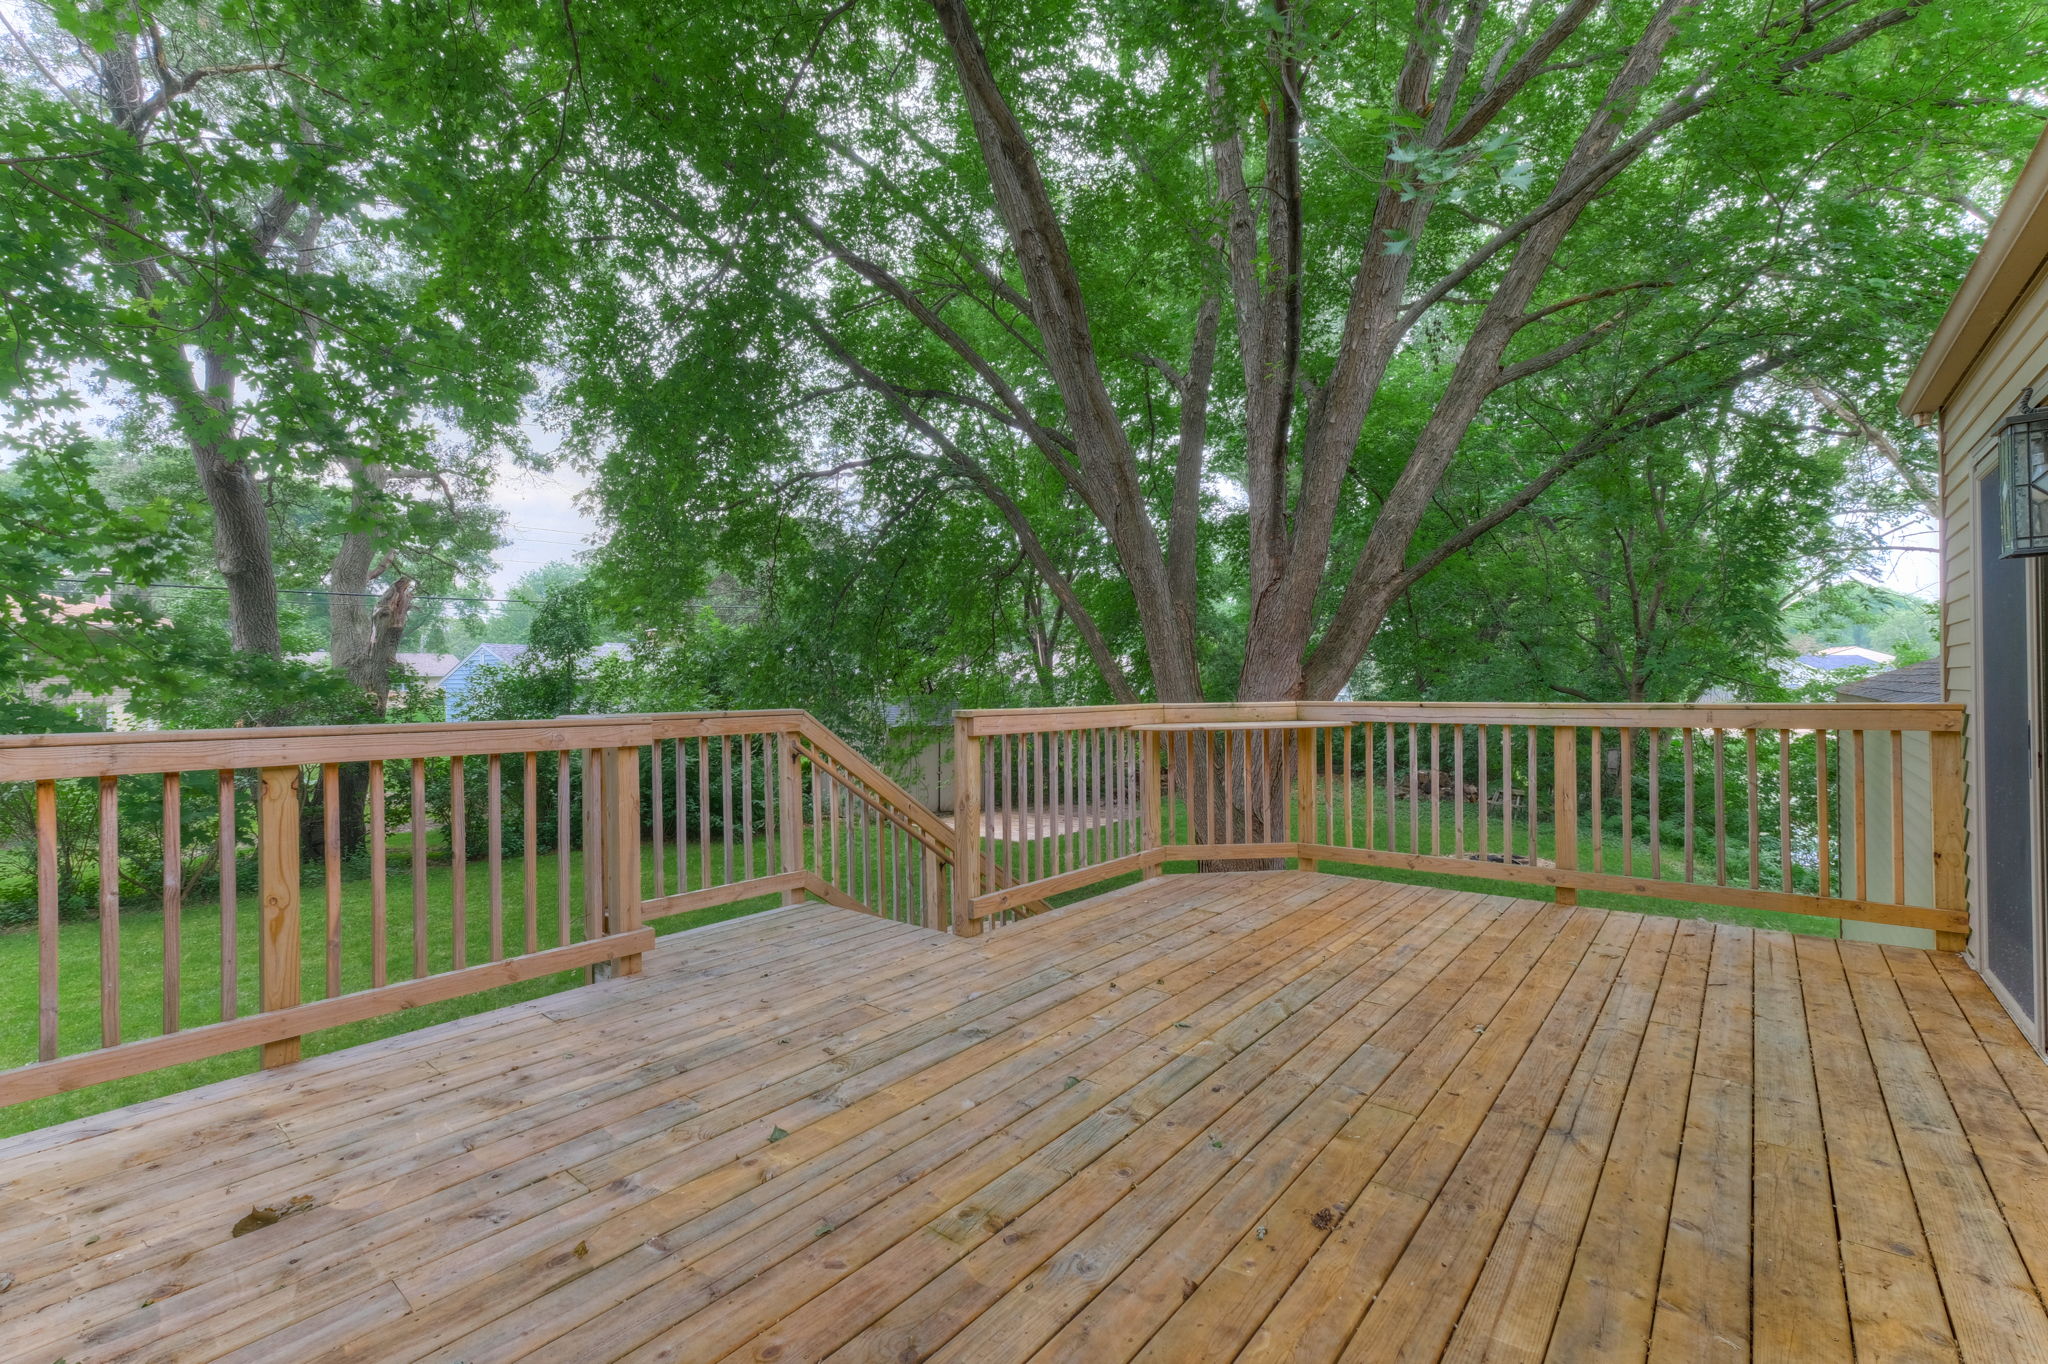 Very nice deck overlooking the large yard.